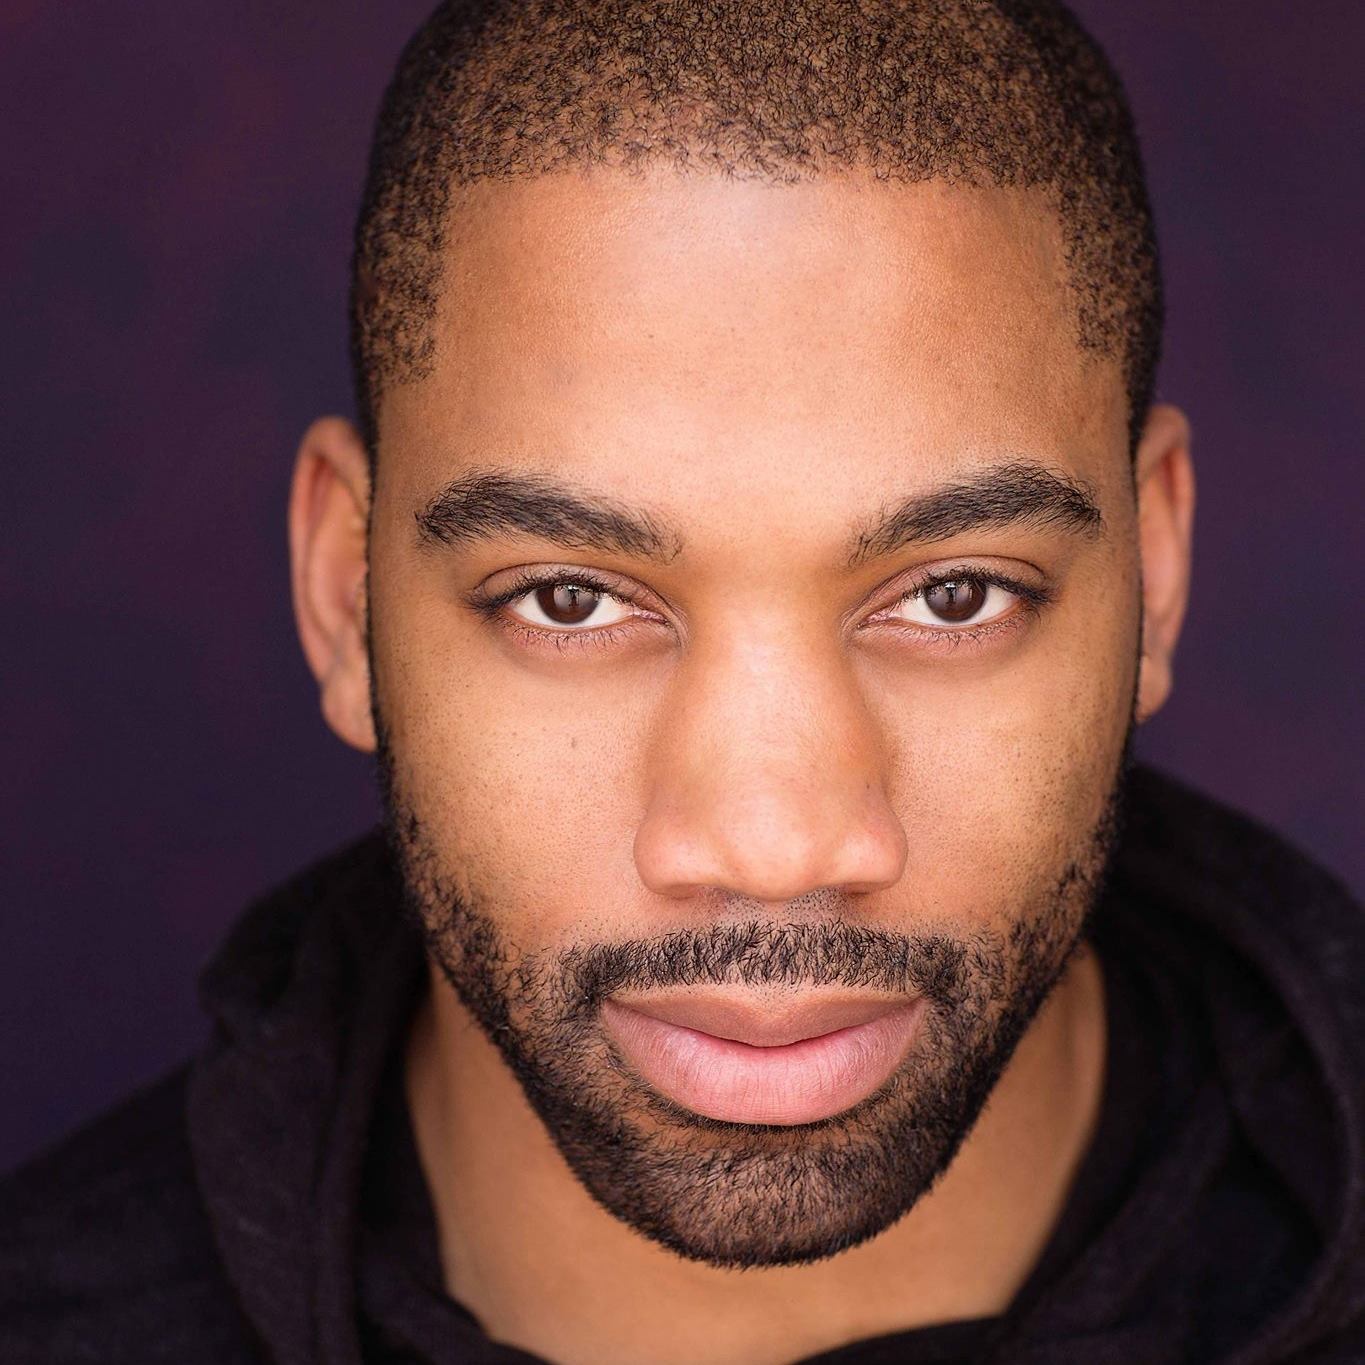 Marcus Brandon: Actor Lands Recurring Season 2 Role in Hit Series "Mayor of Kingstown That Stars Jeremy Renner